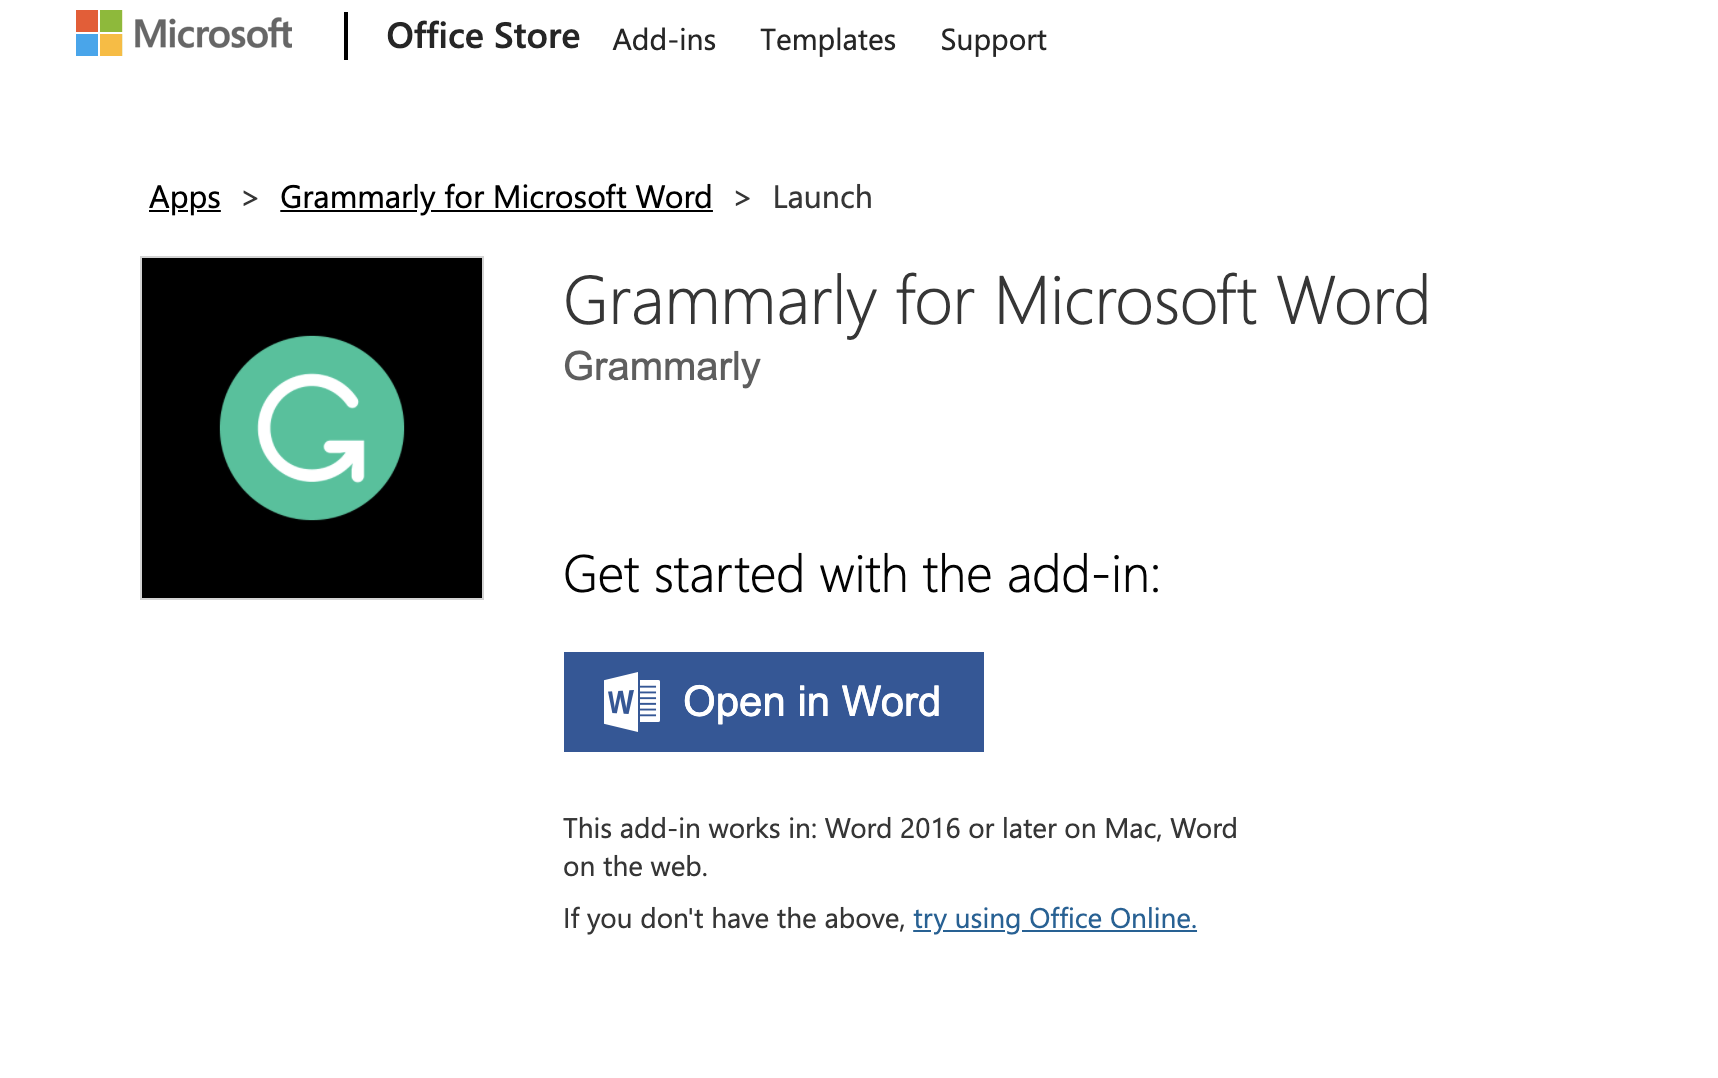 Grammarly for Microsoft Office